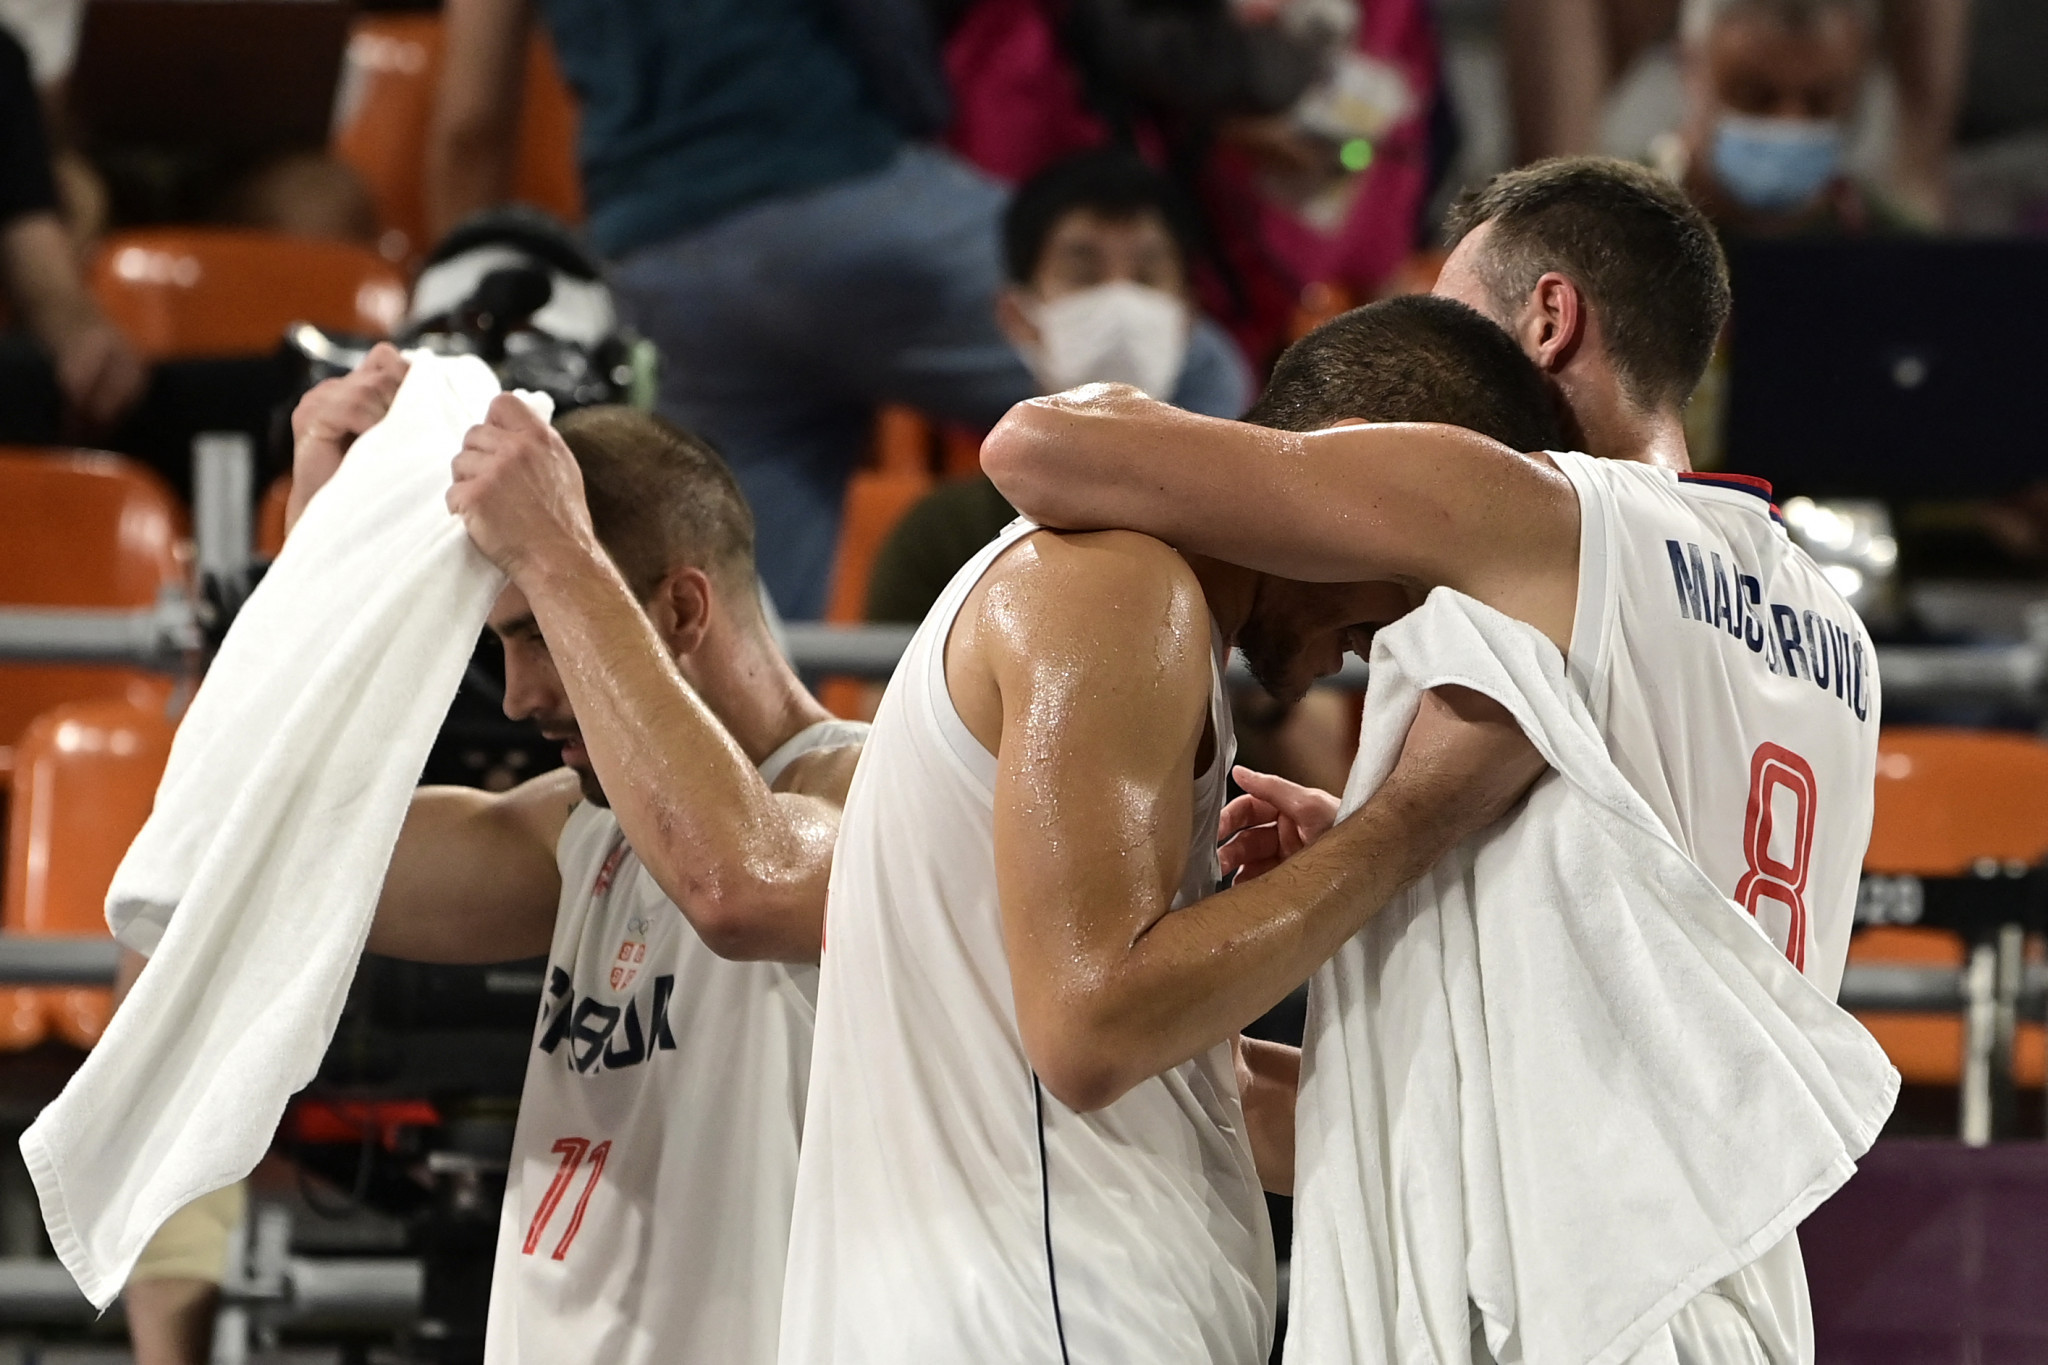 Serbia remain convincing heading into the FIBA 3x3 World Cup knockout rounds ©Getty Images